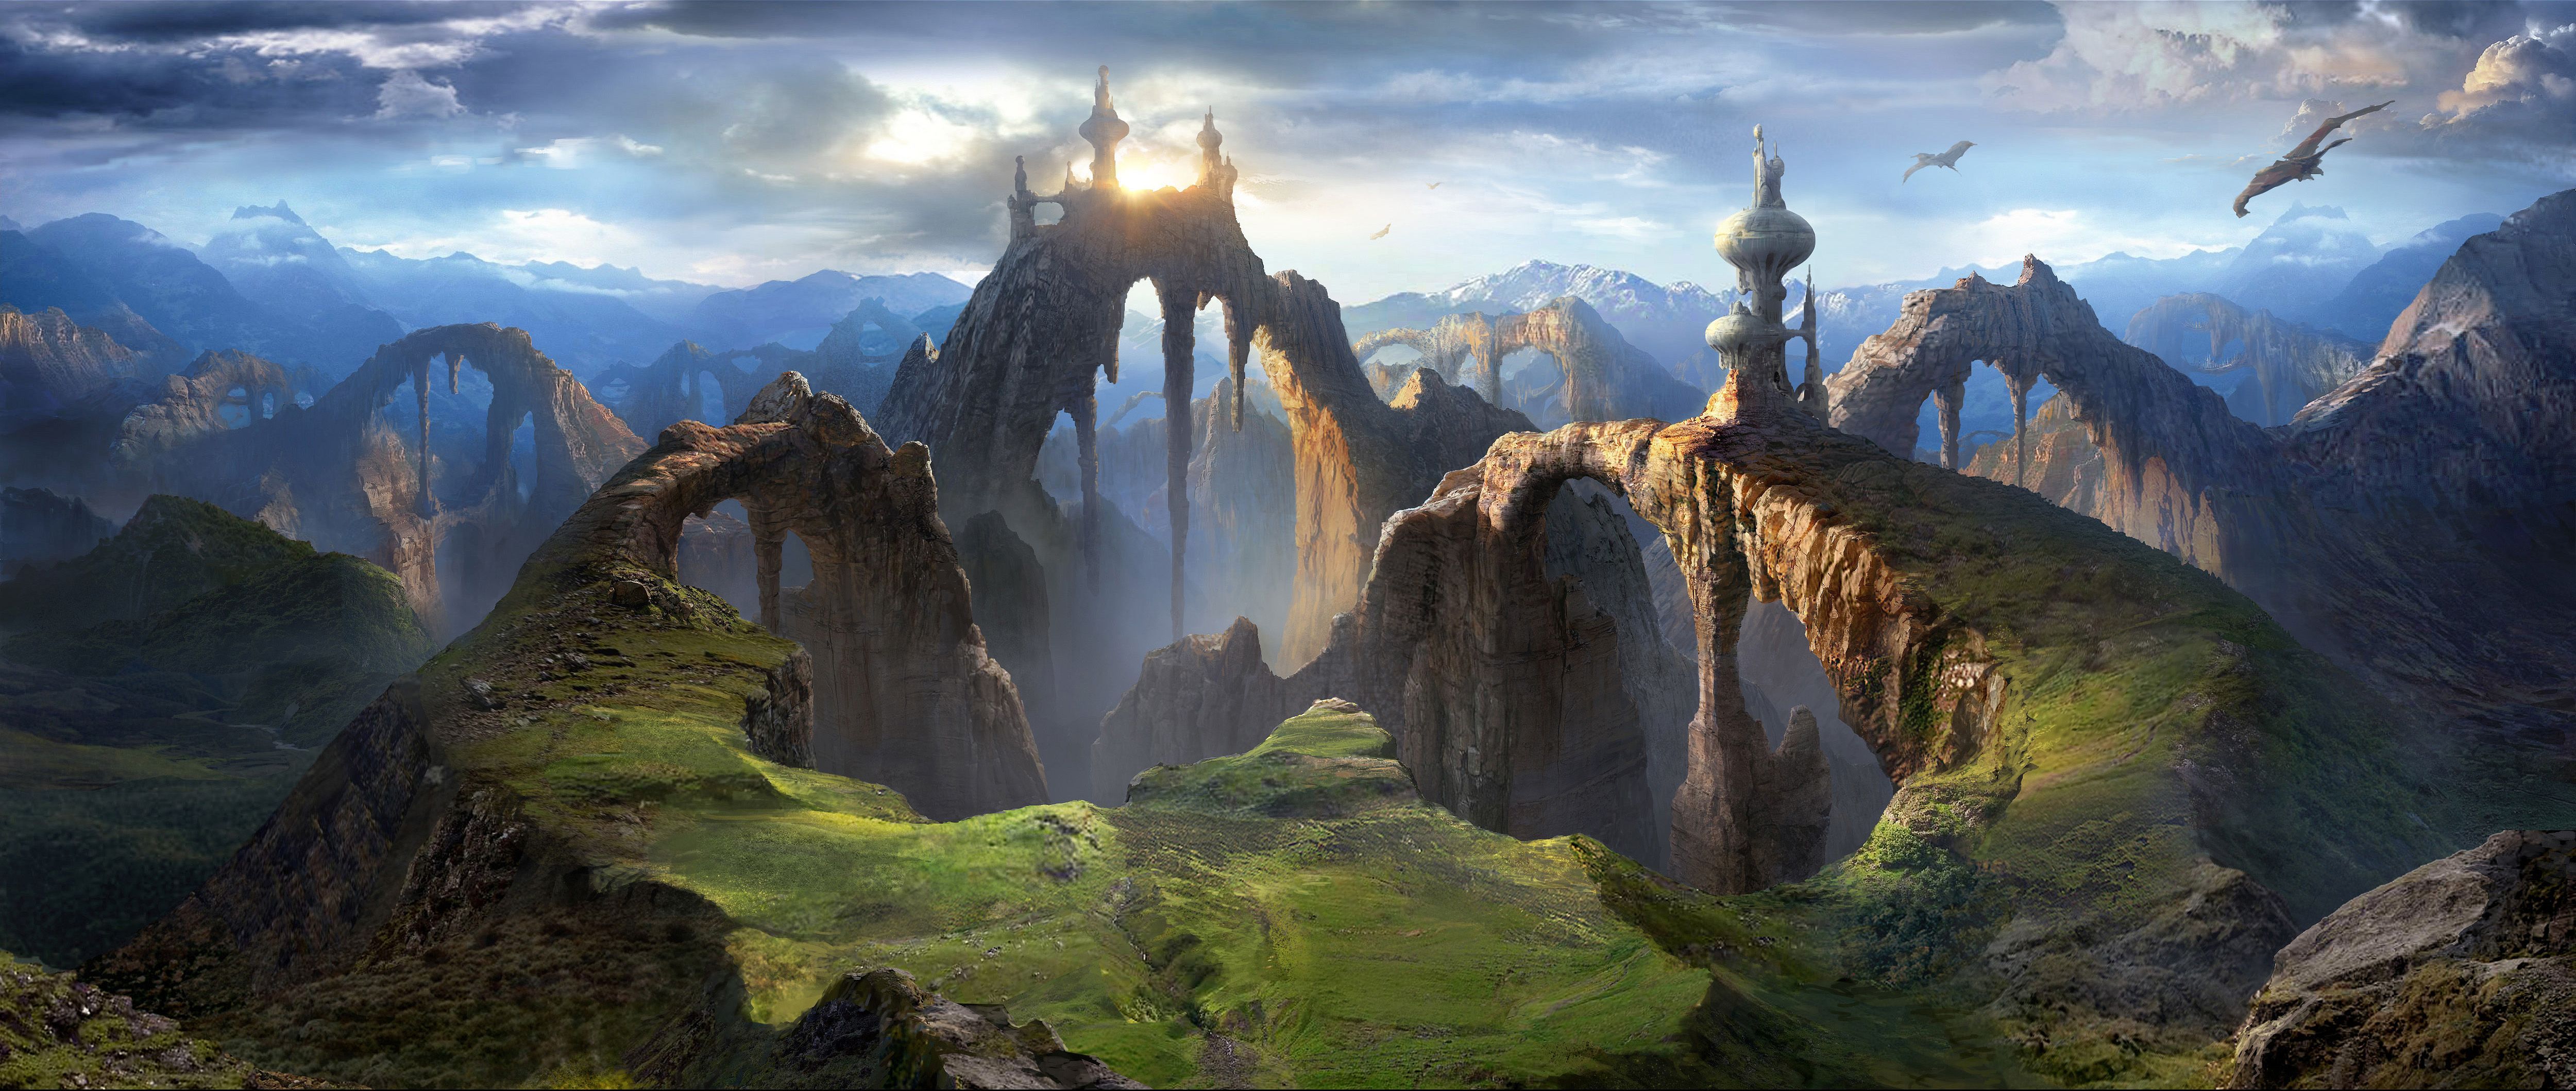 Matte Painting Wallpapers - Top Free Matte Painting Backgrounds ...